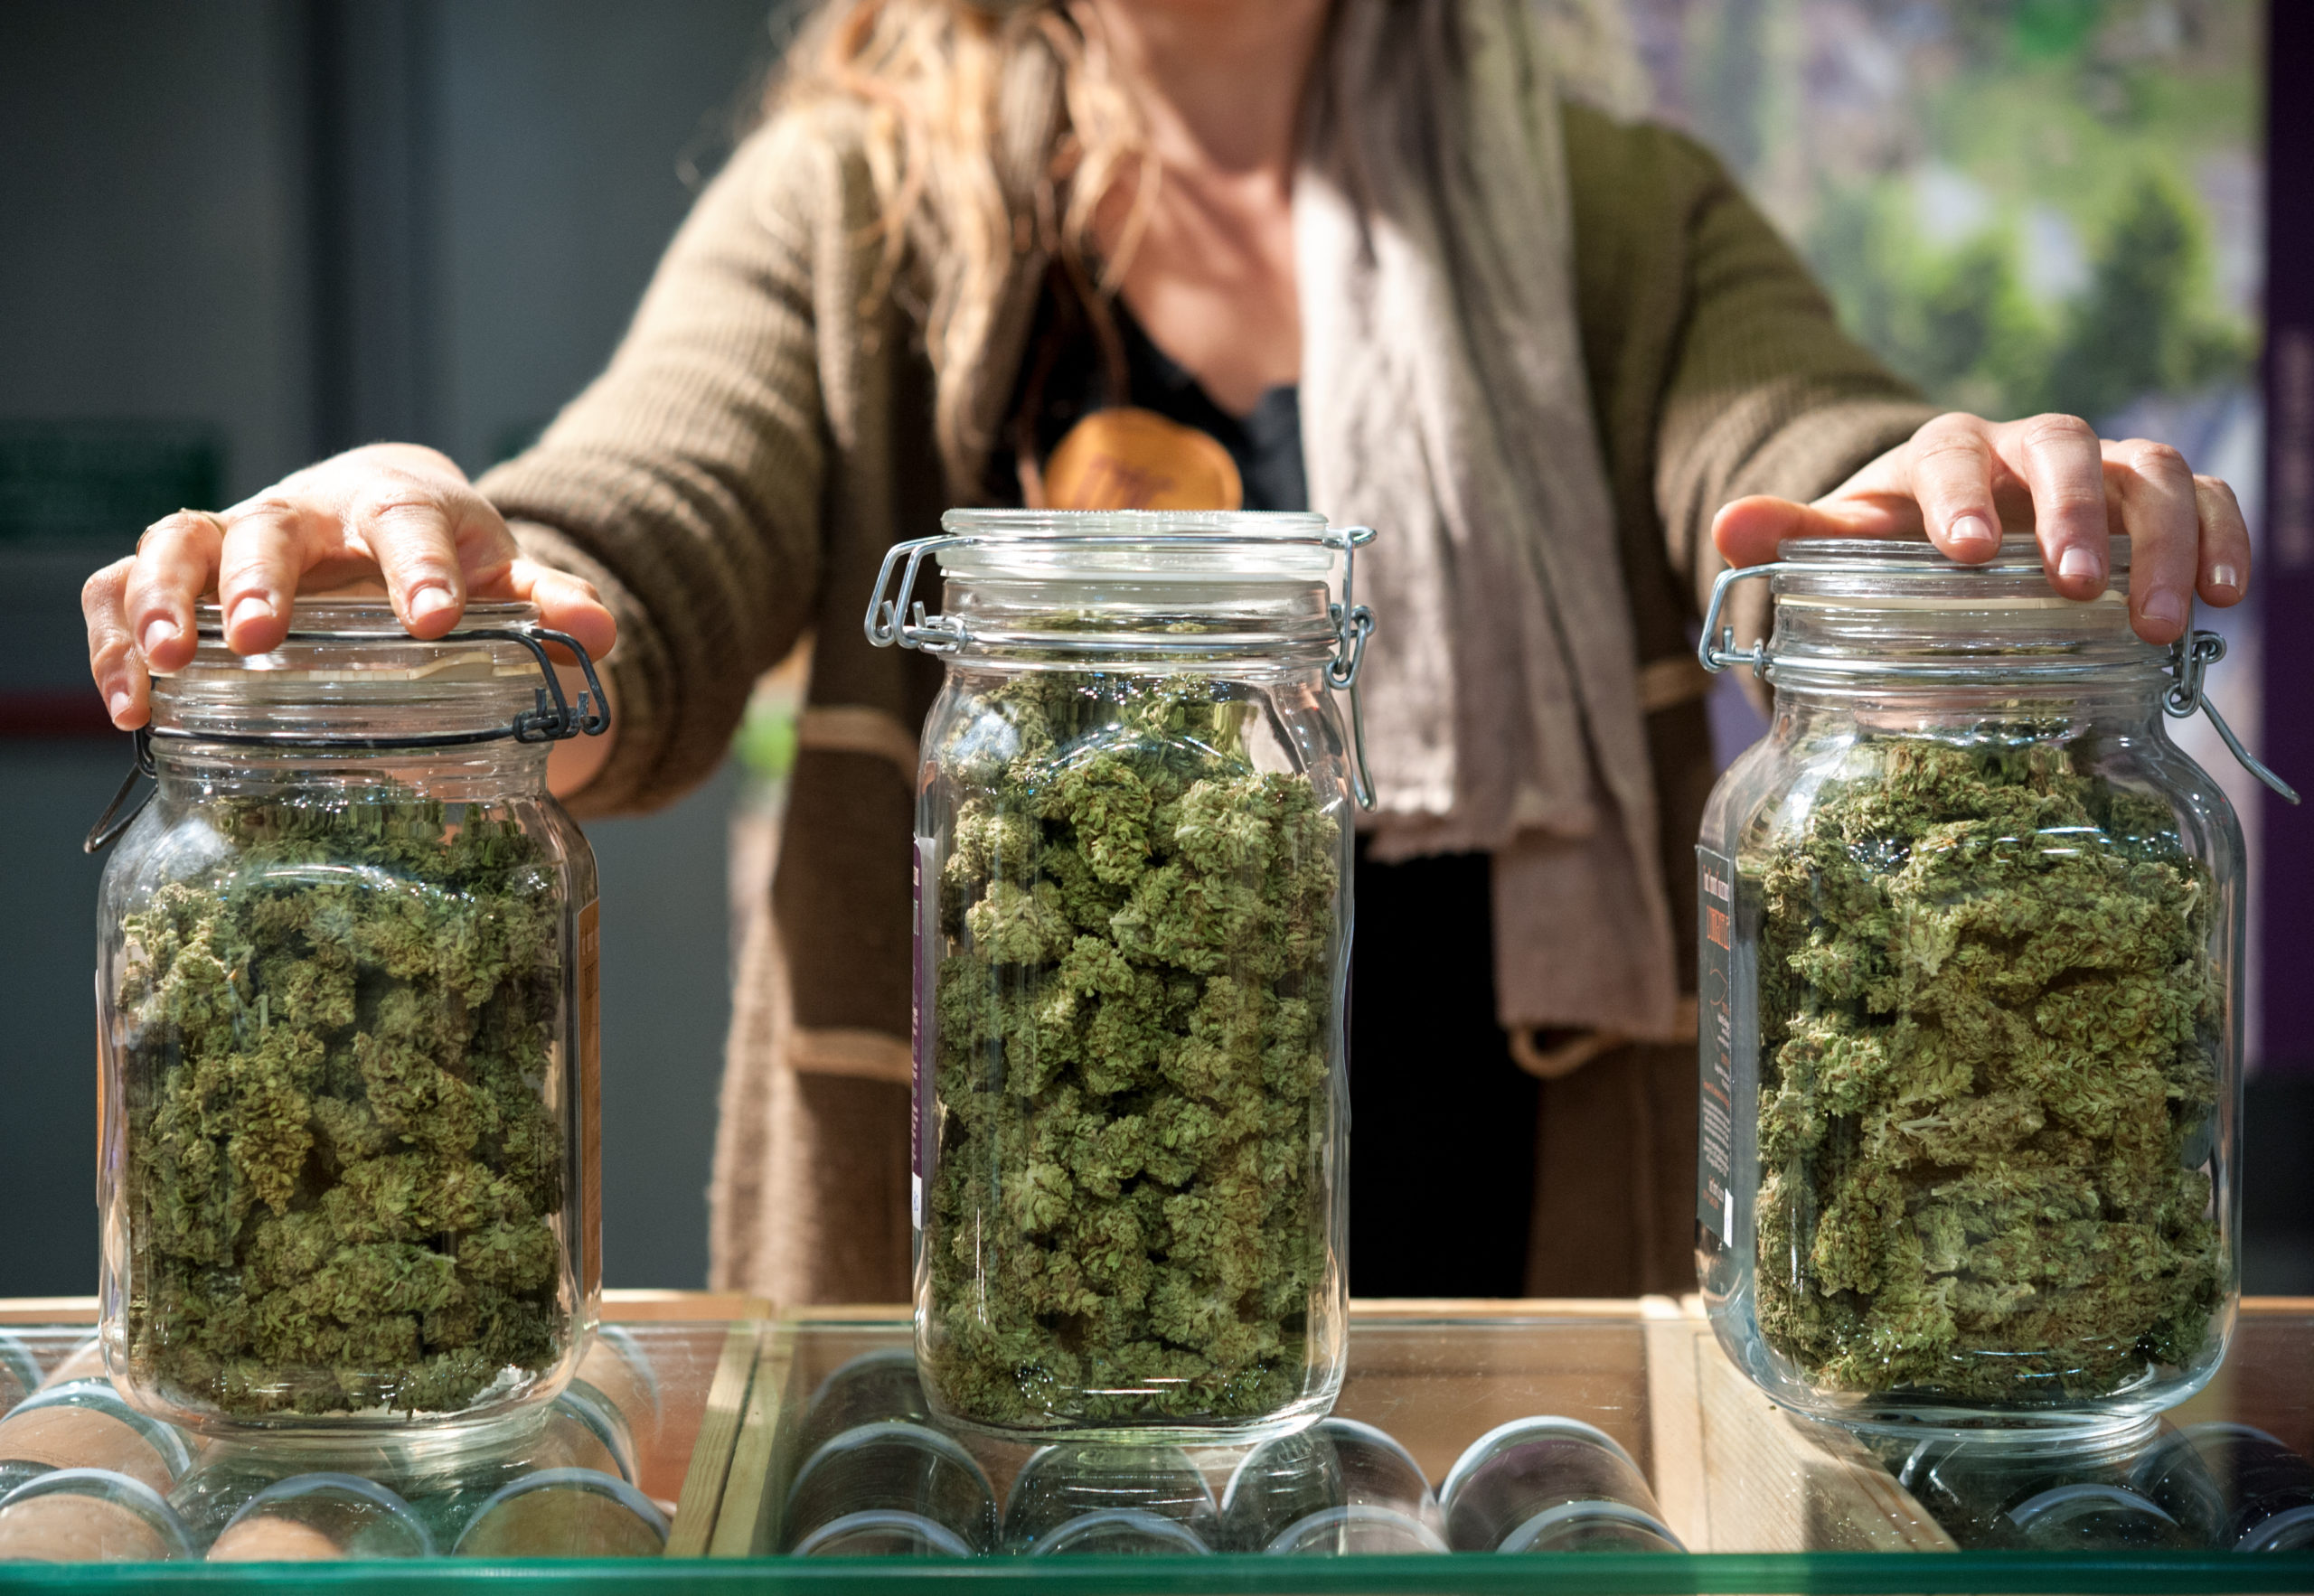 Oregon Sold $793 Million of Cannabis in 2019.